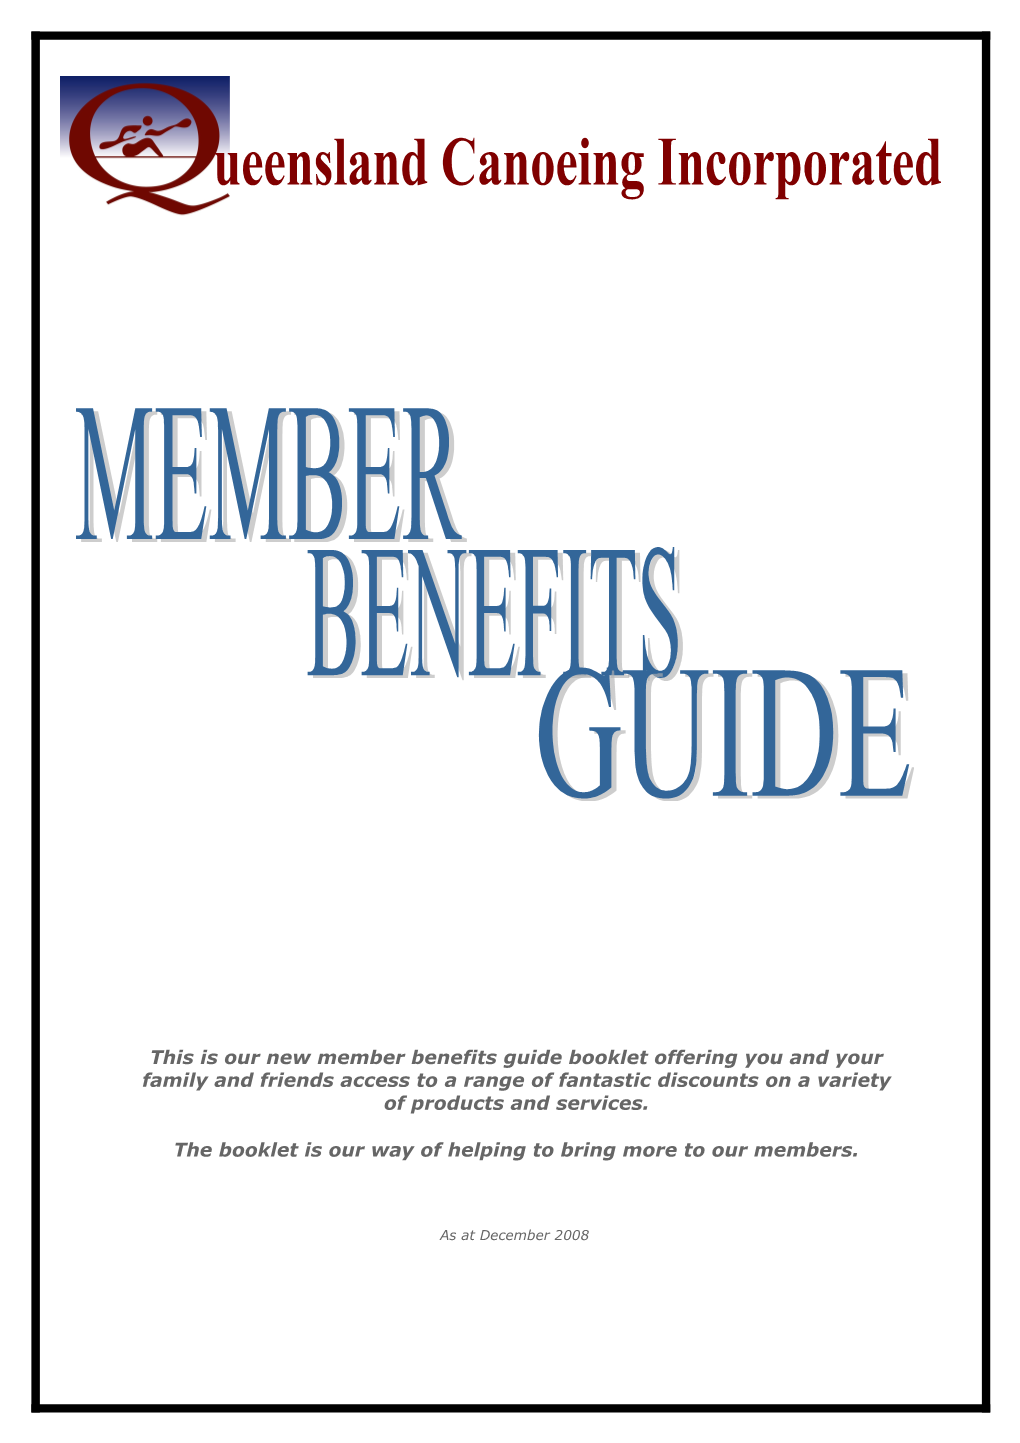 The Booklet Is Our Way of Helping to Bring More to Our Members